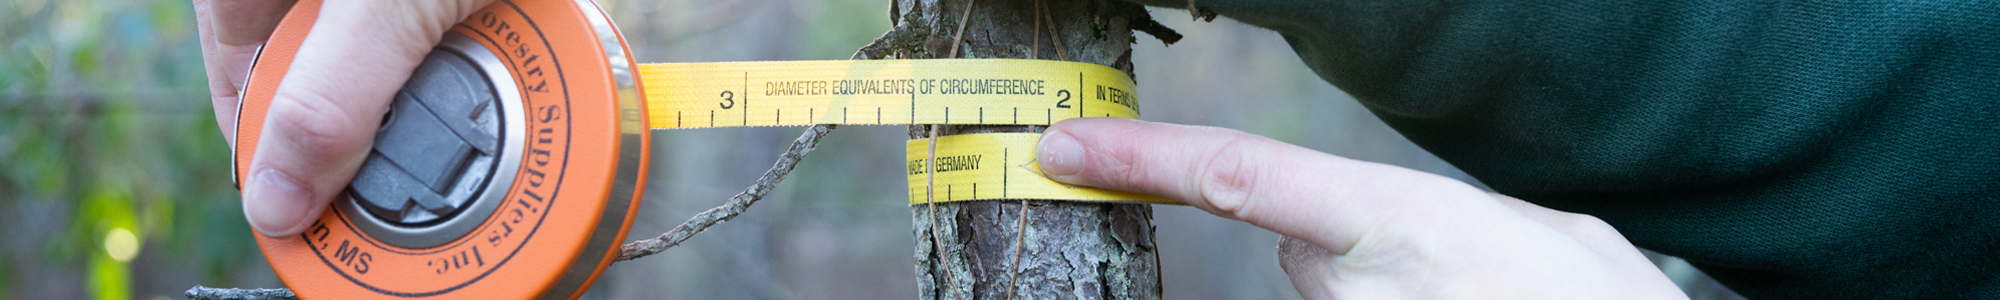 Most trees removed during thinning will be less than 2 inches in diameter. 